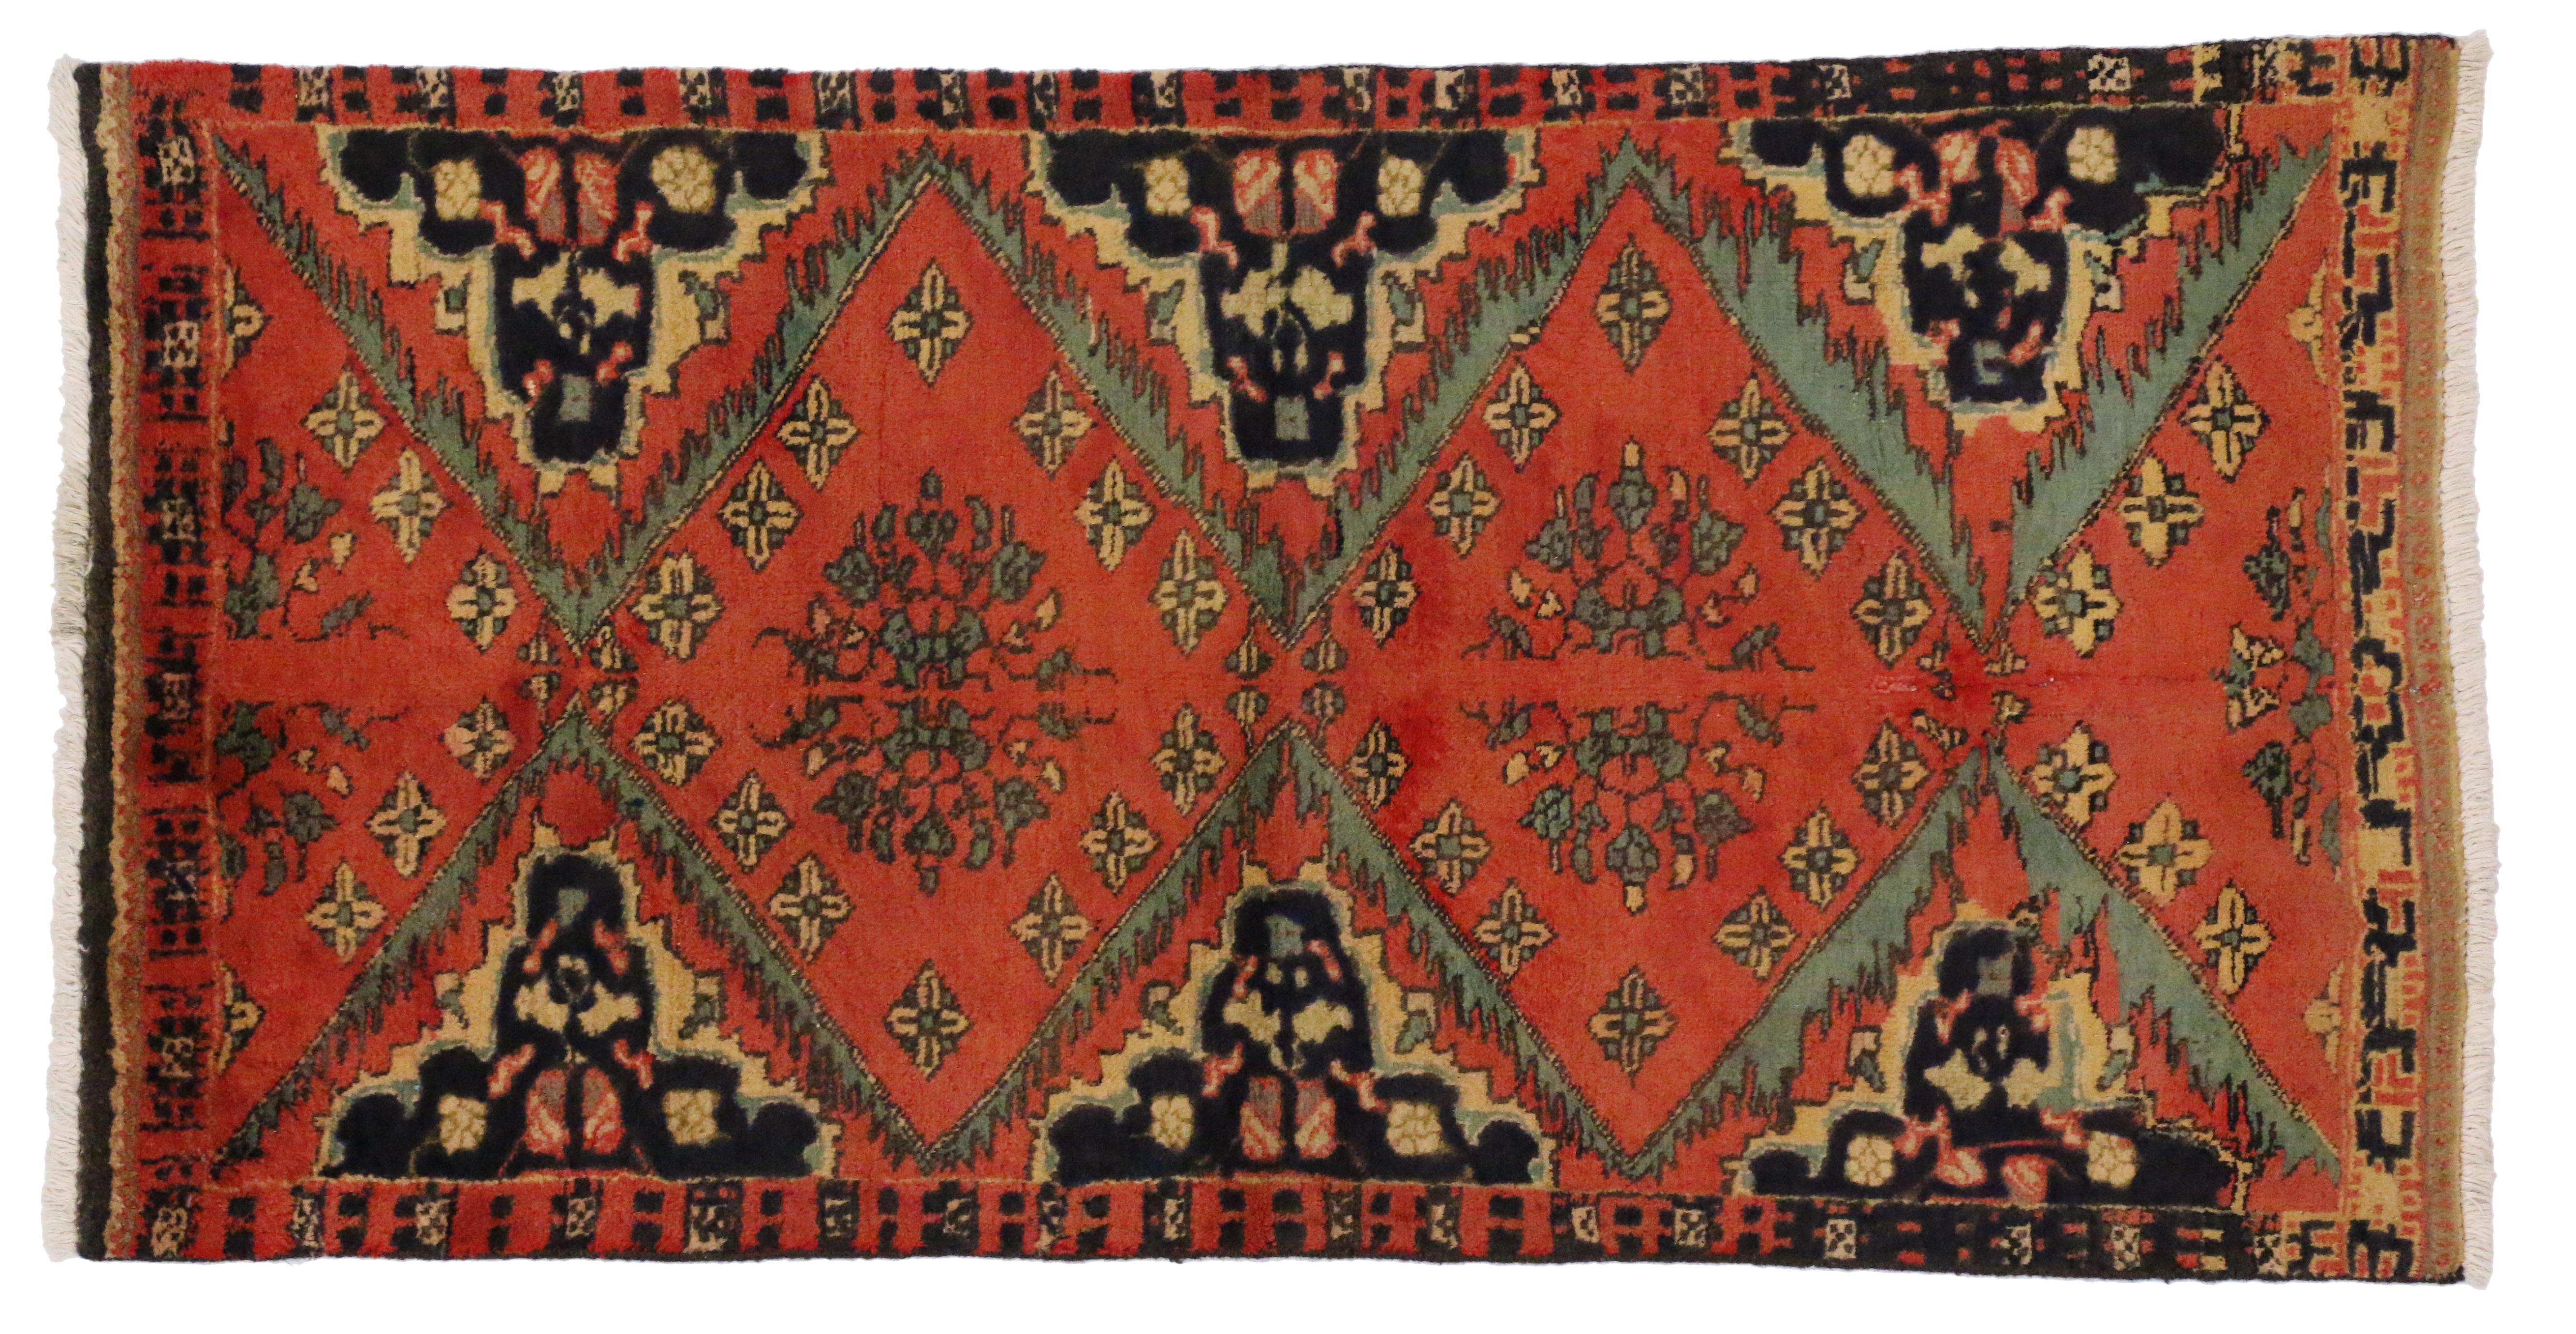 Hand-Knotted Vintage Persian Hamadan Rug, Entry or Foyer Rug